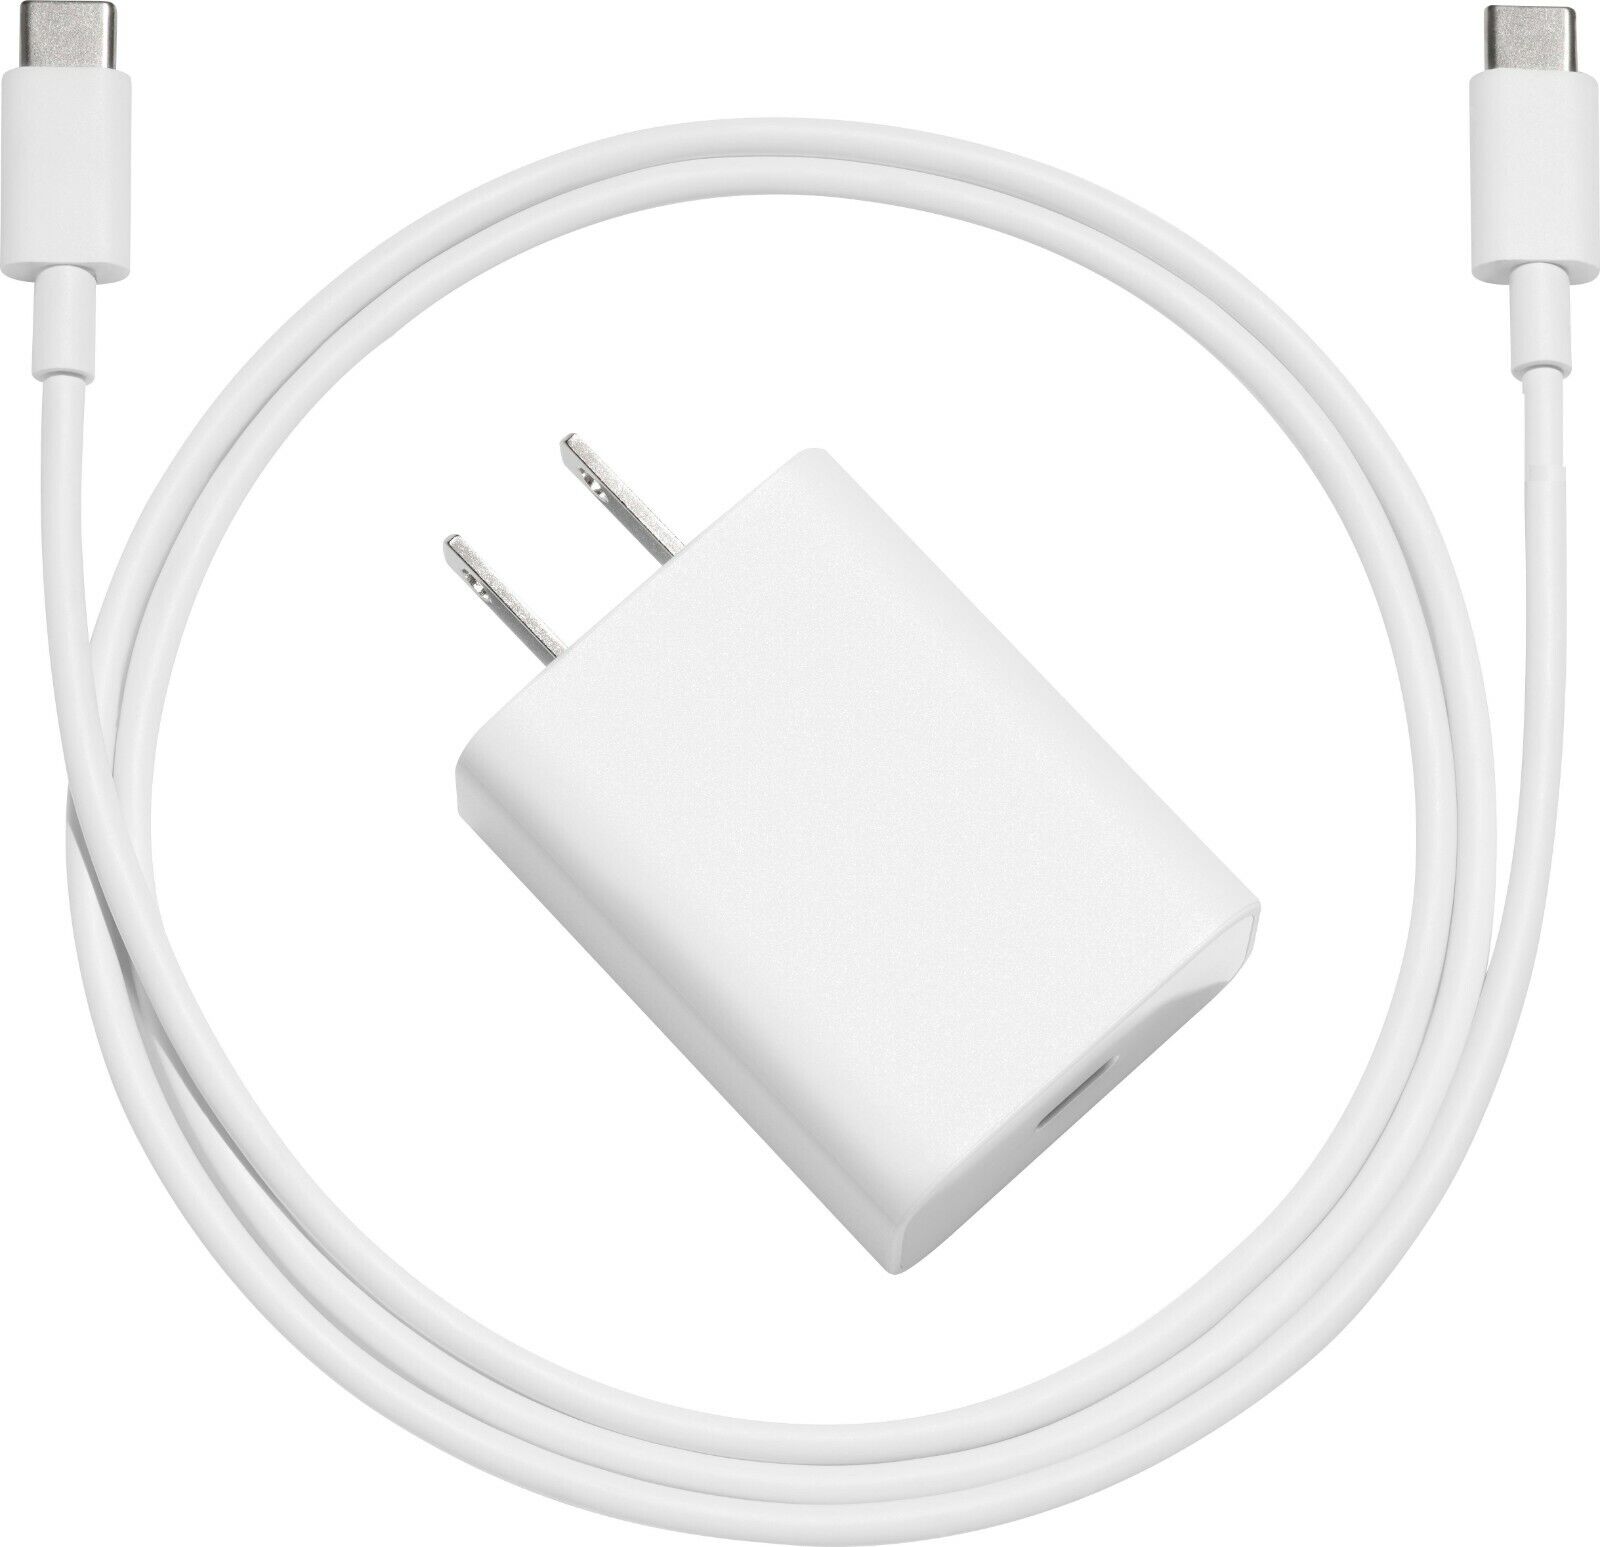 *Brand NEW*GOOGLE 18W FAST USB-C POWER ADAPTER PLUS 3FT TYPE C CABLE - GA00193-US - GENUINE